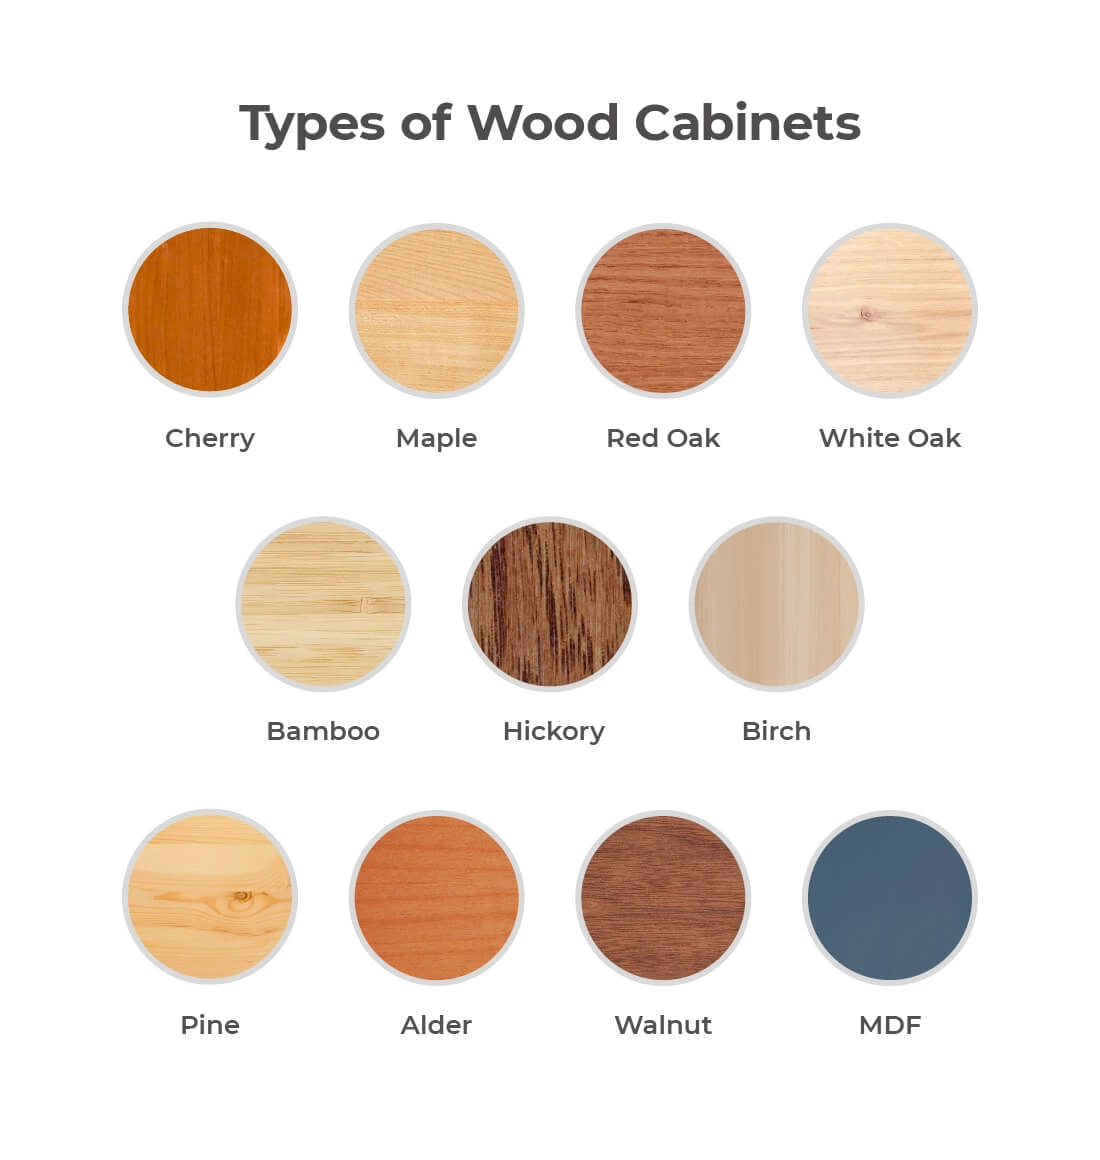 Close-ups of the 11 types of wood cabinet grains